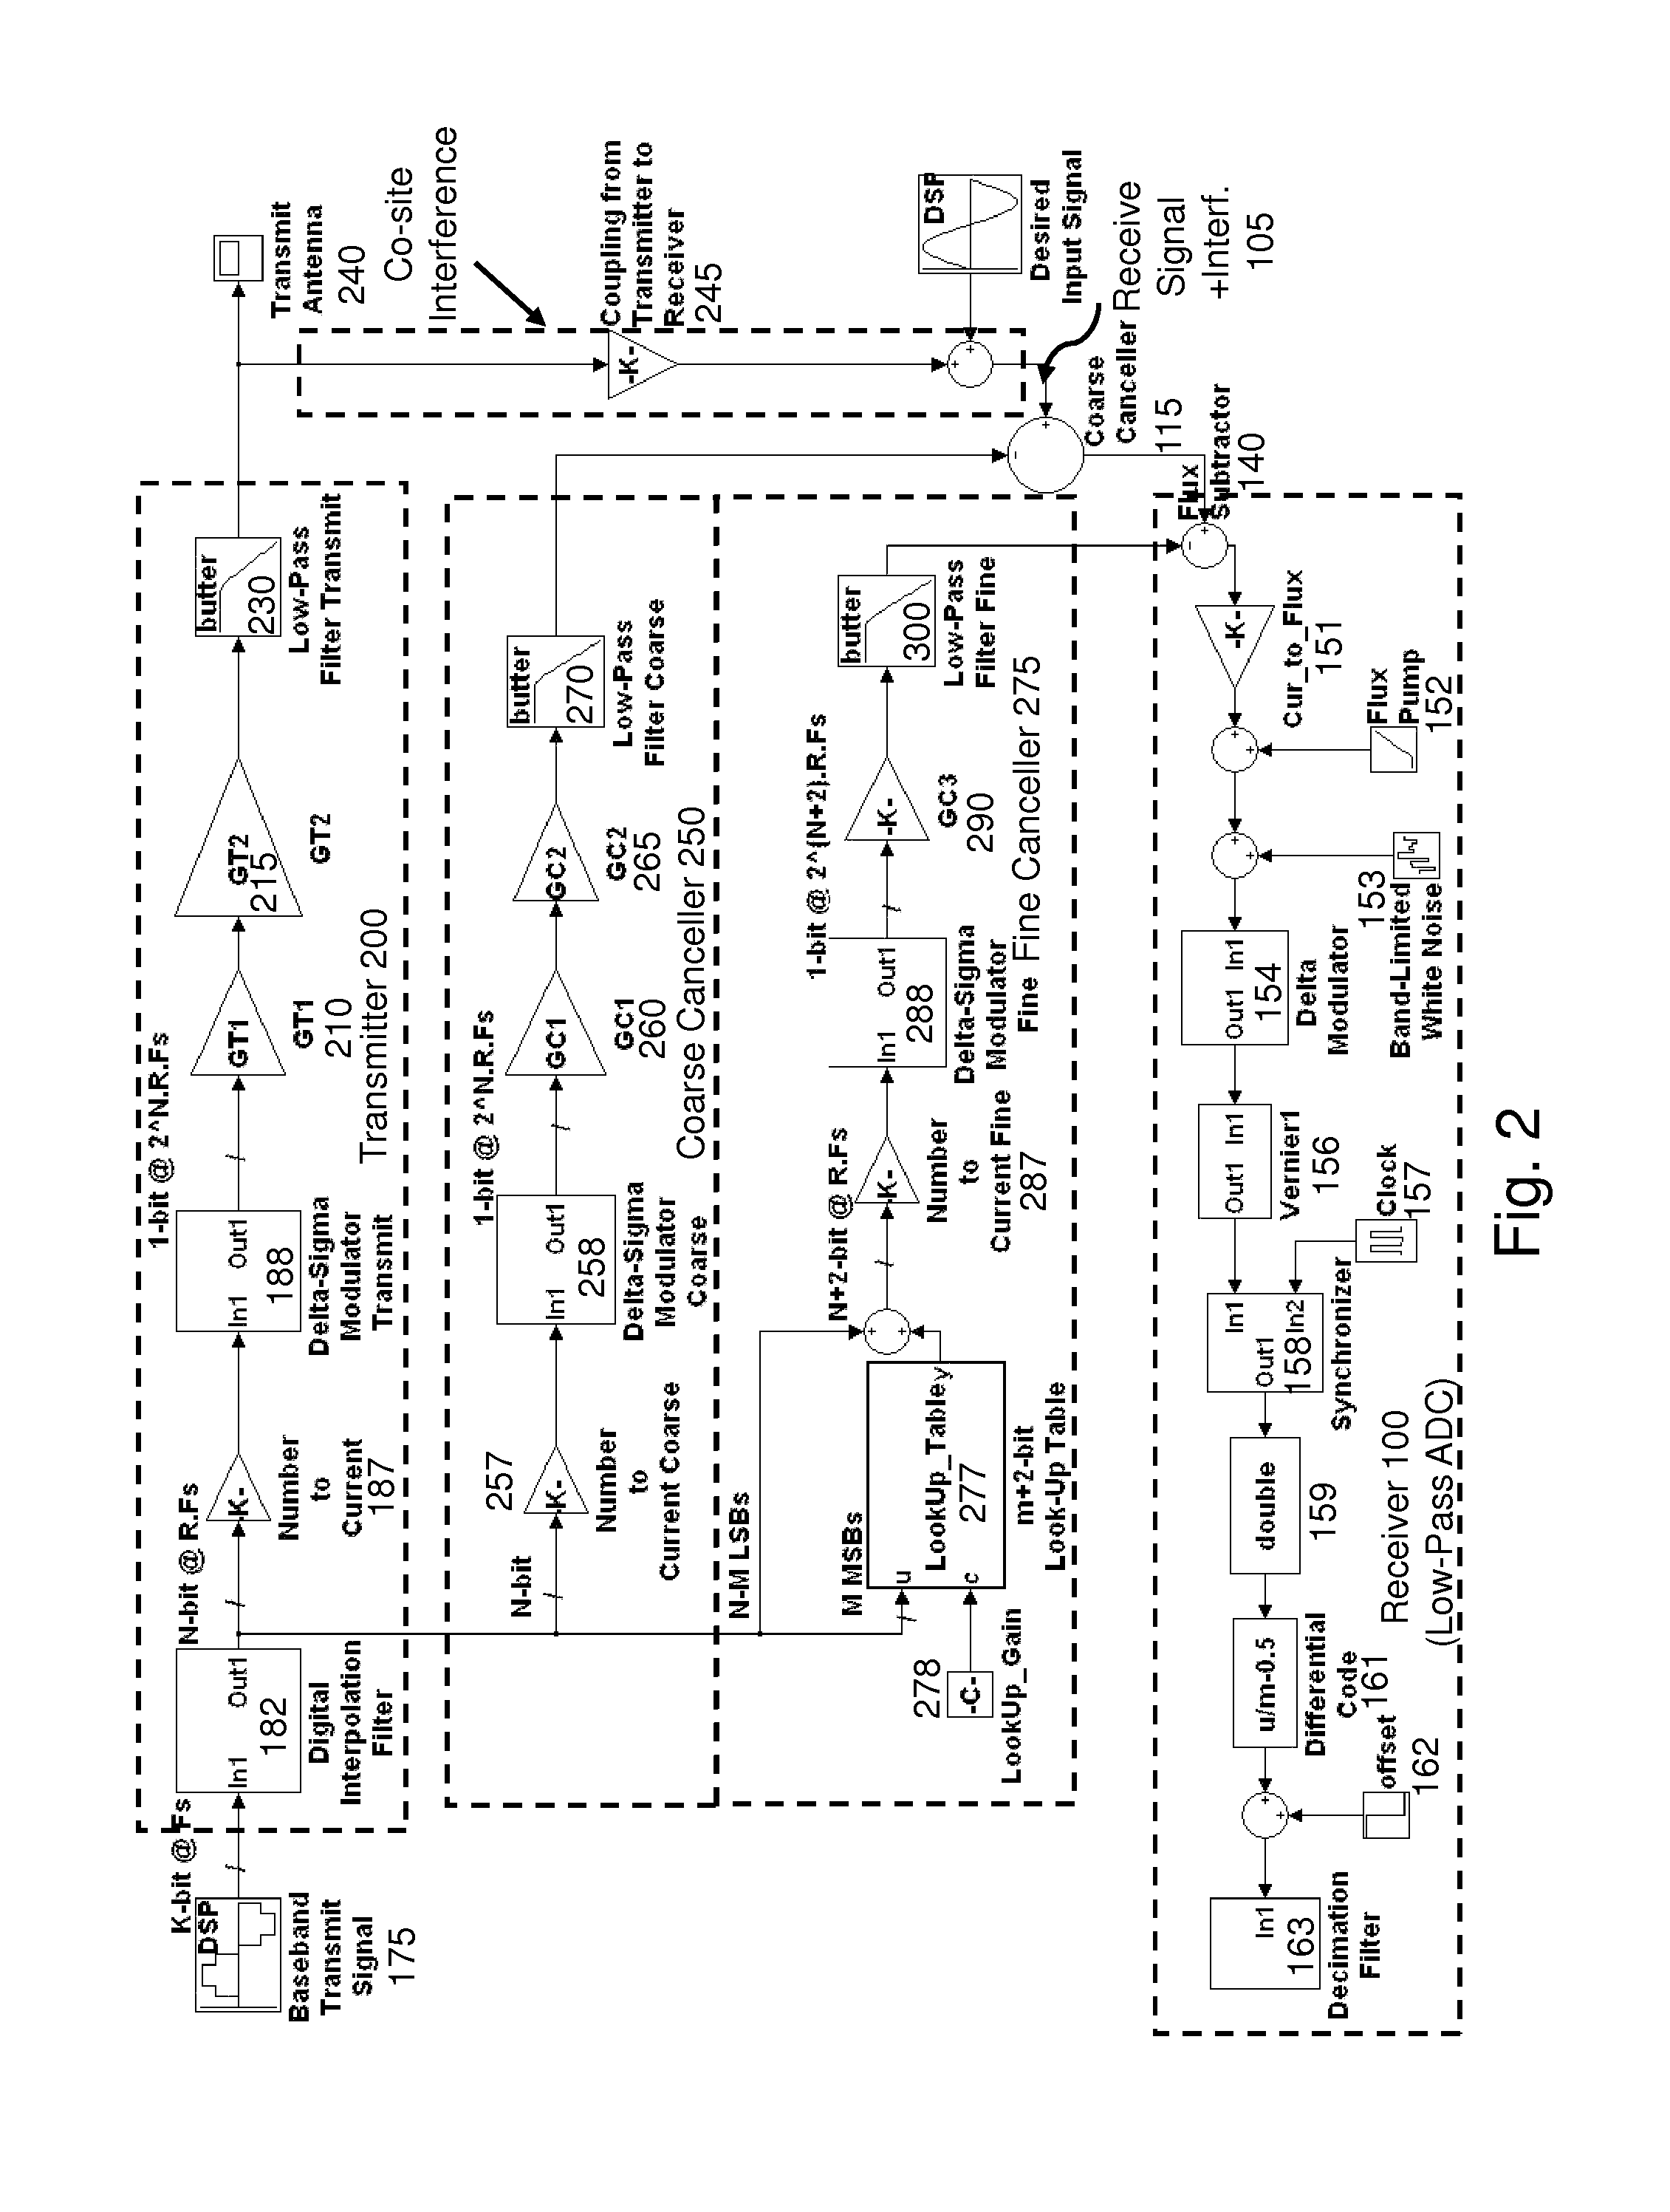 Two stage radio frequency interference cancellation system and method